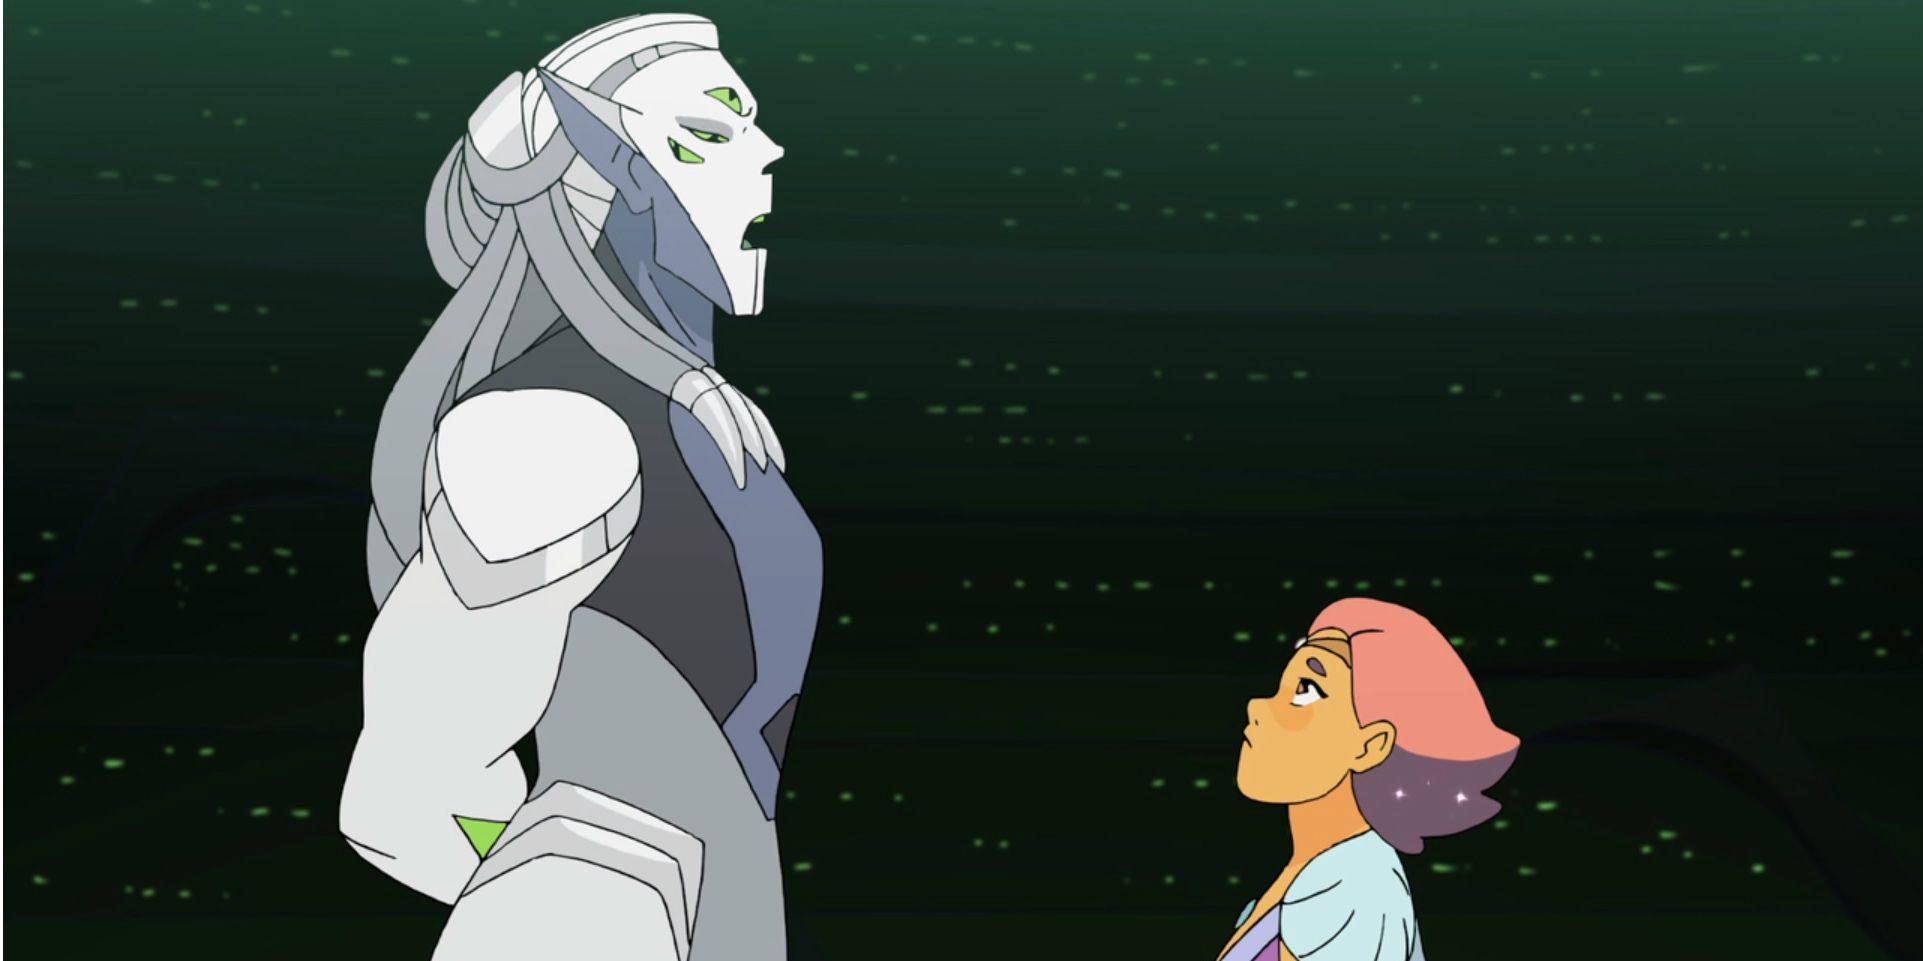 SheRa 10 Unanswered Questions We Have About The Show